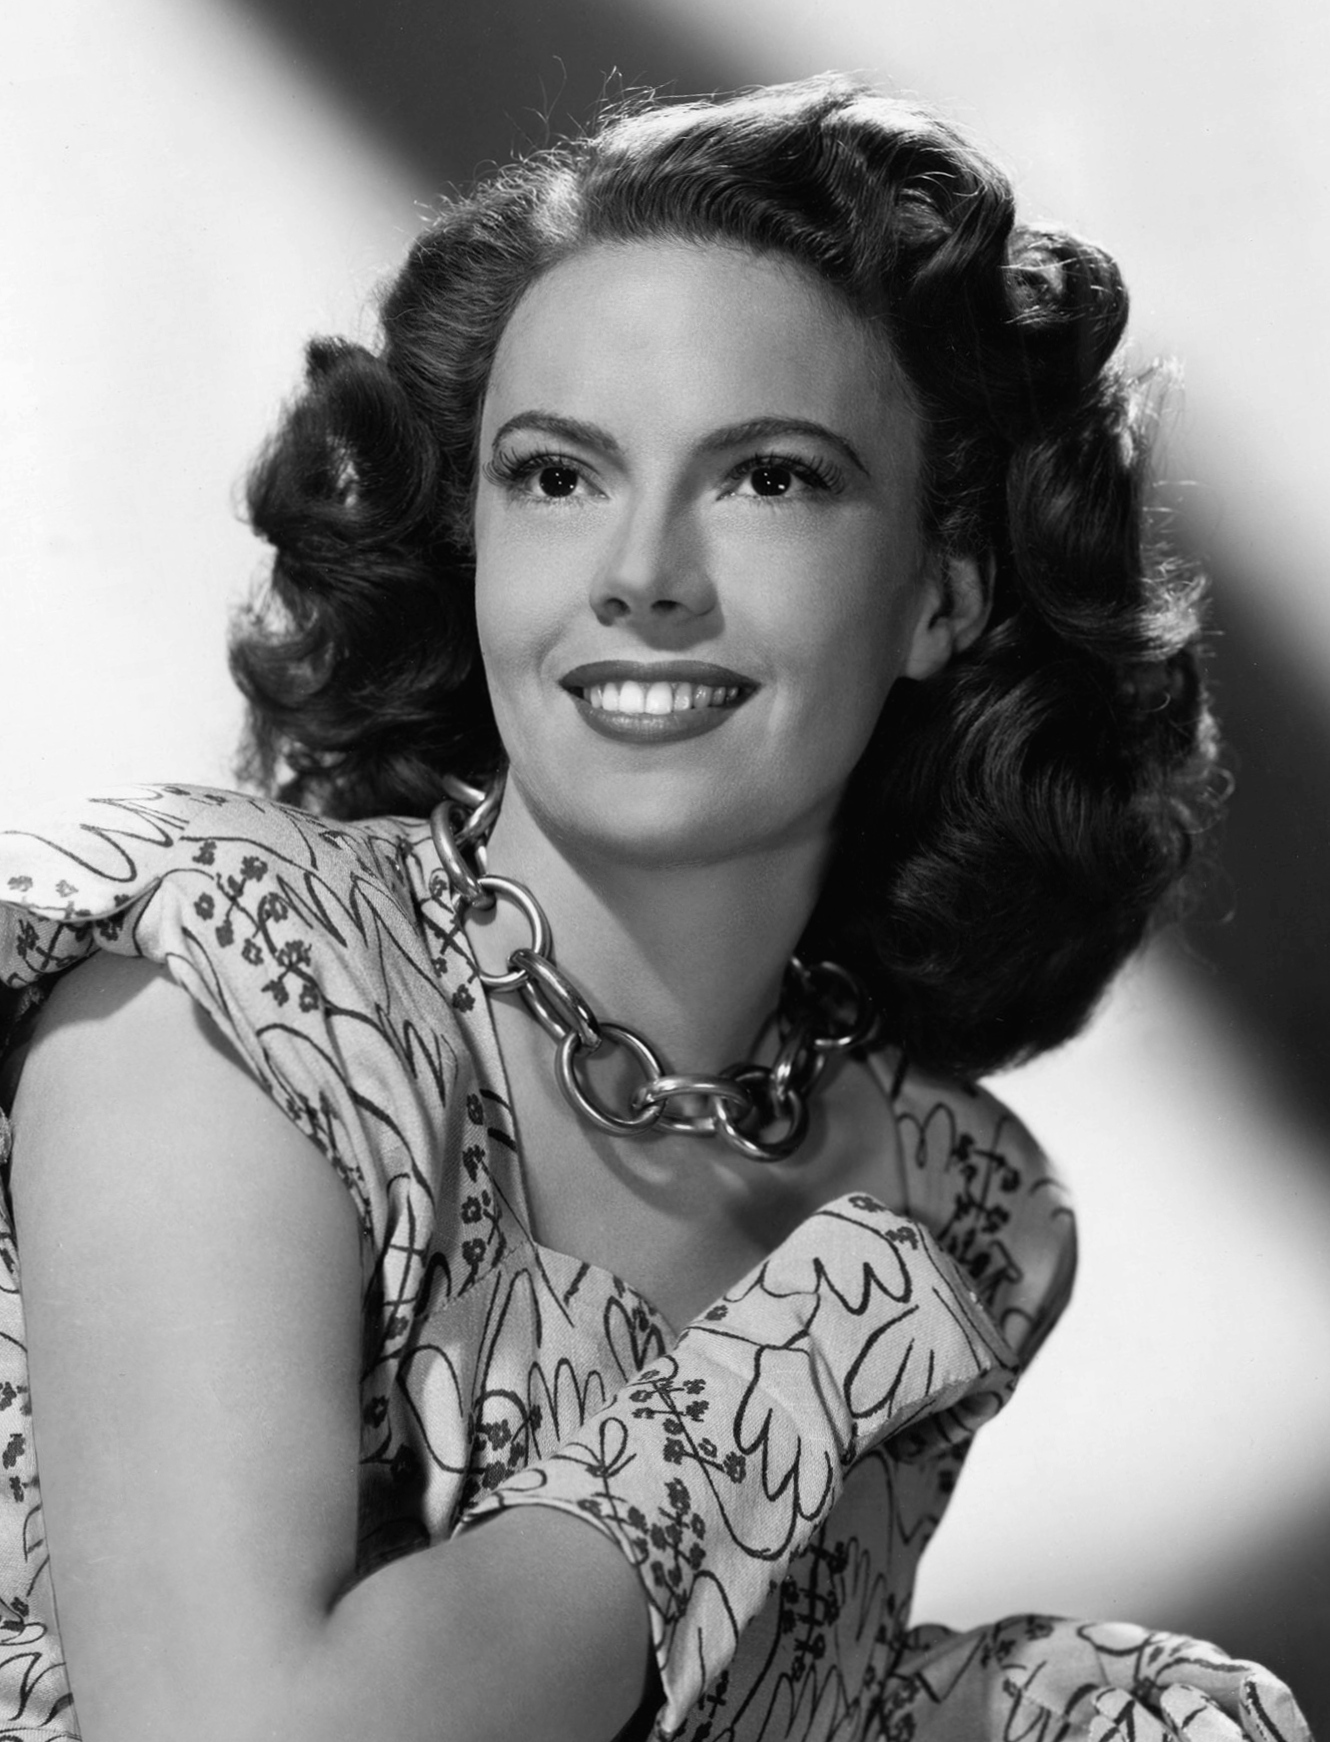 Meadows in the 1940s